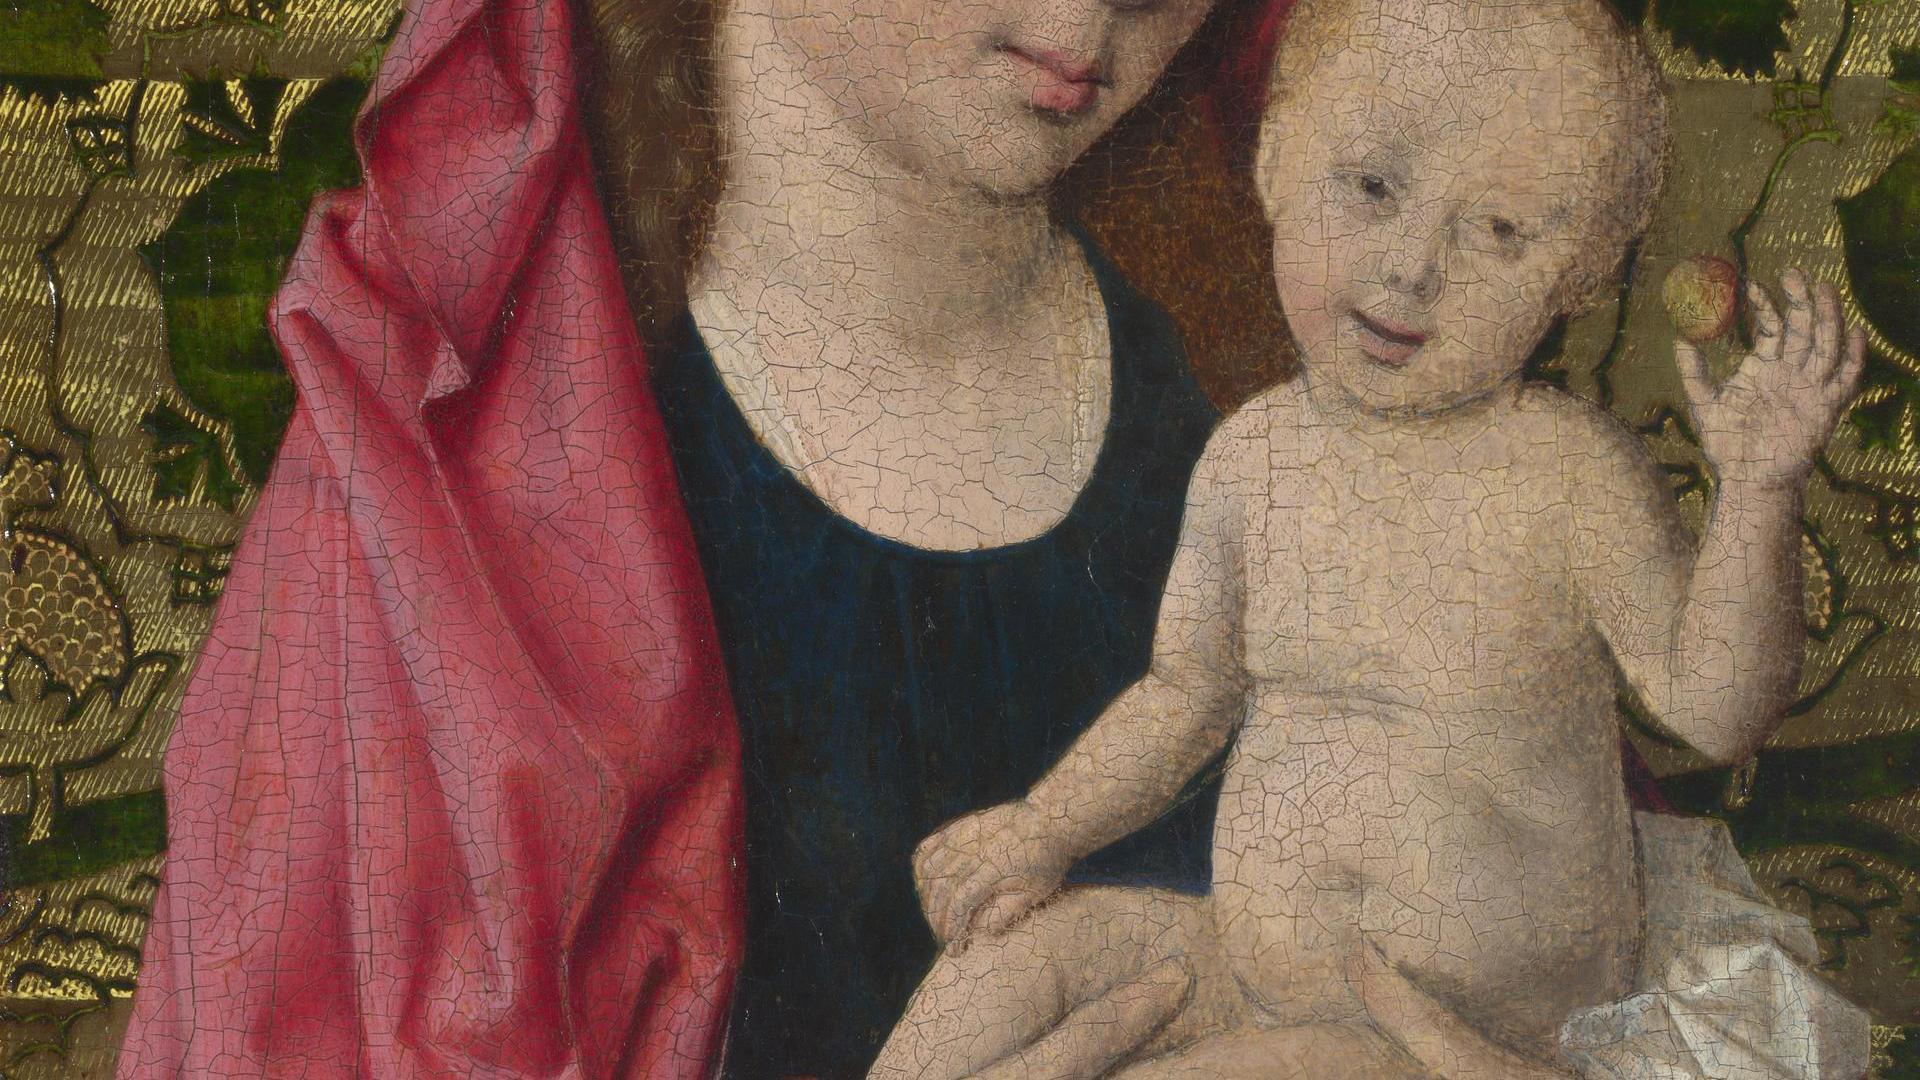 The Virgin and Child by Workshop of Dirk Bouts